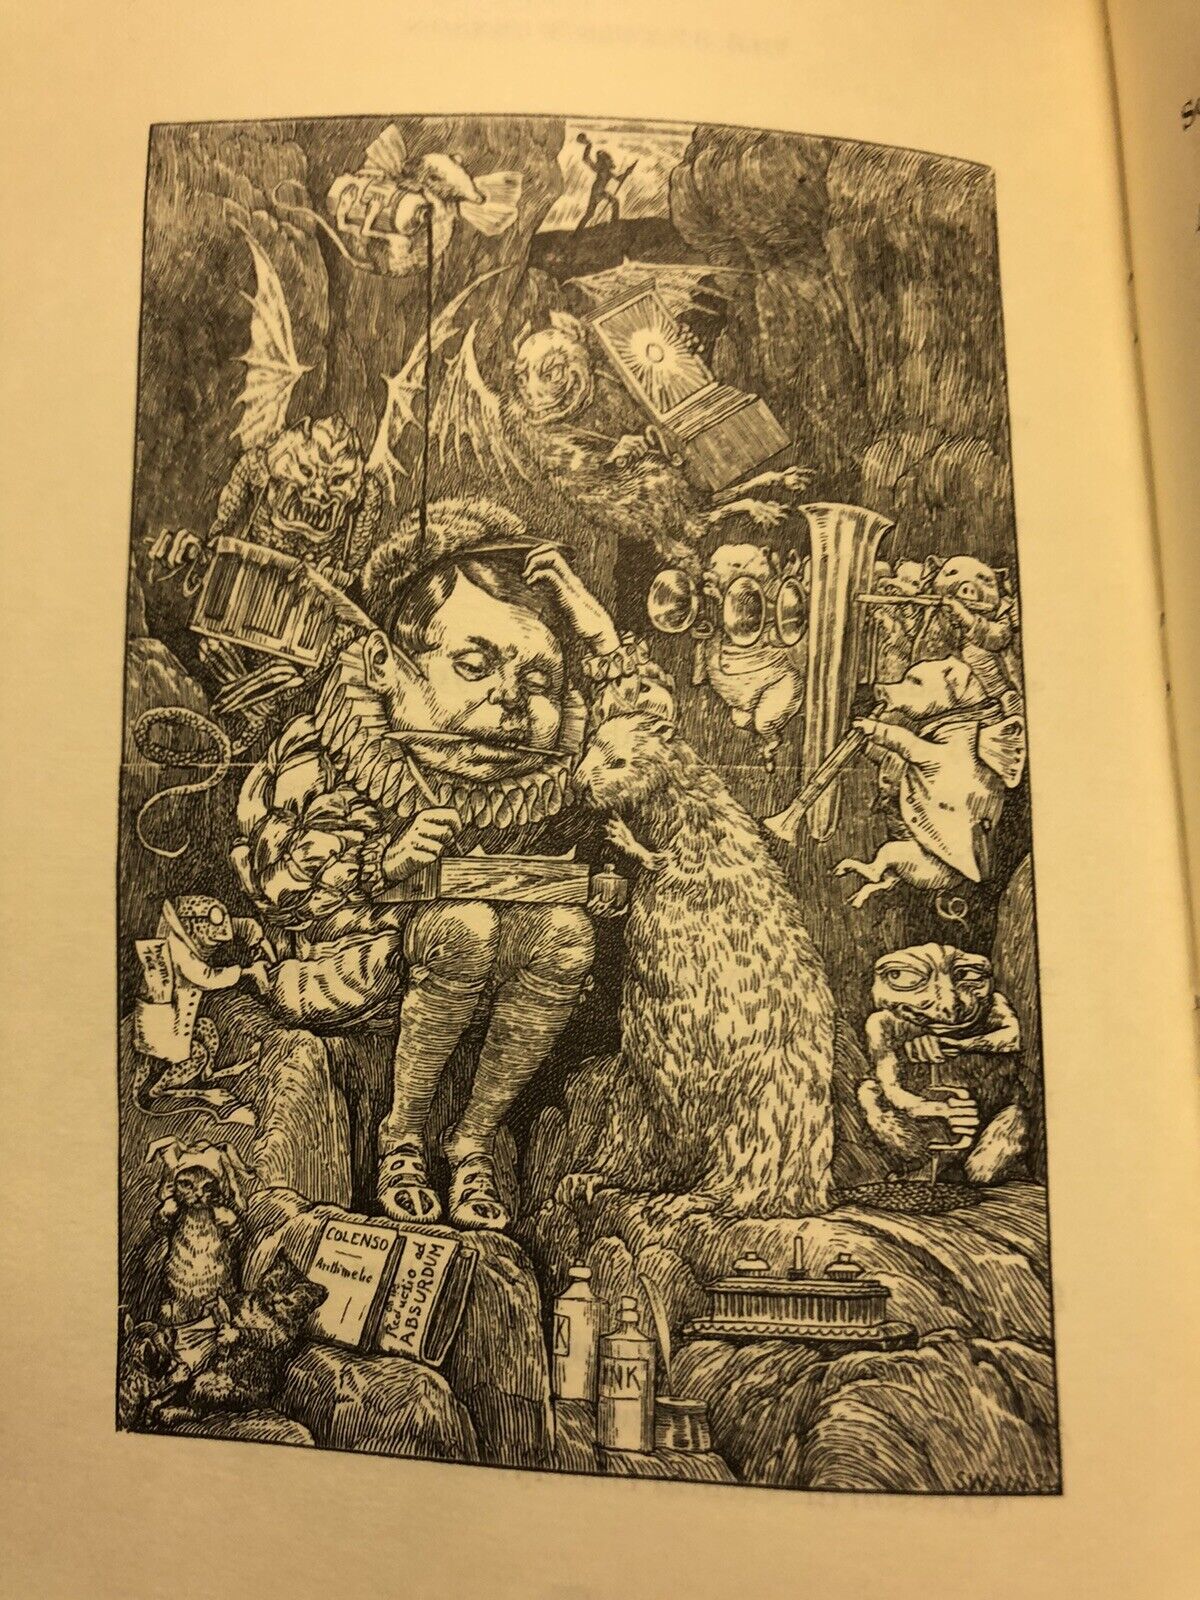 Lewis Carroll : The Hunting of the Snark : Illus by Henry Holiday : Macmillan